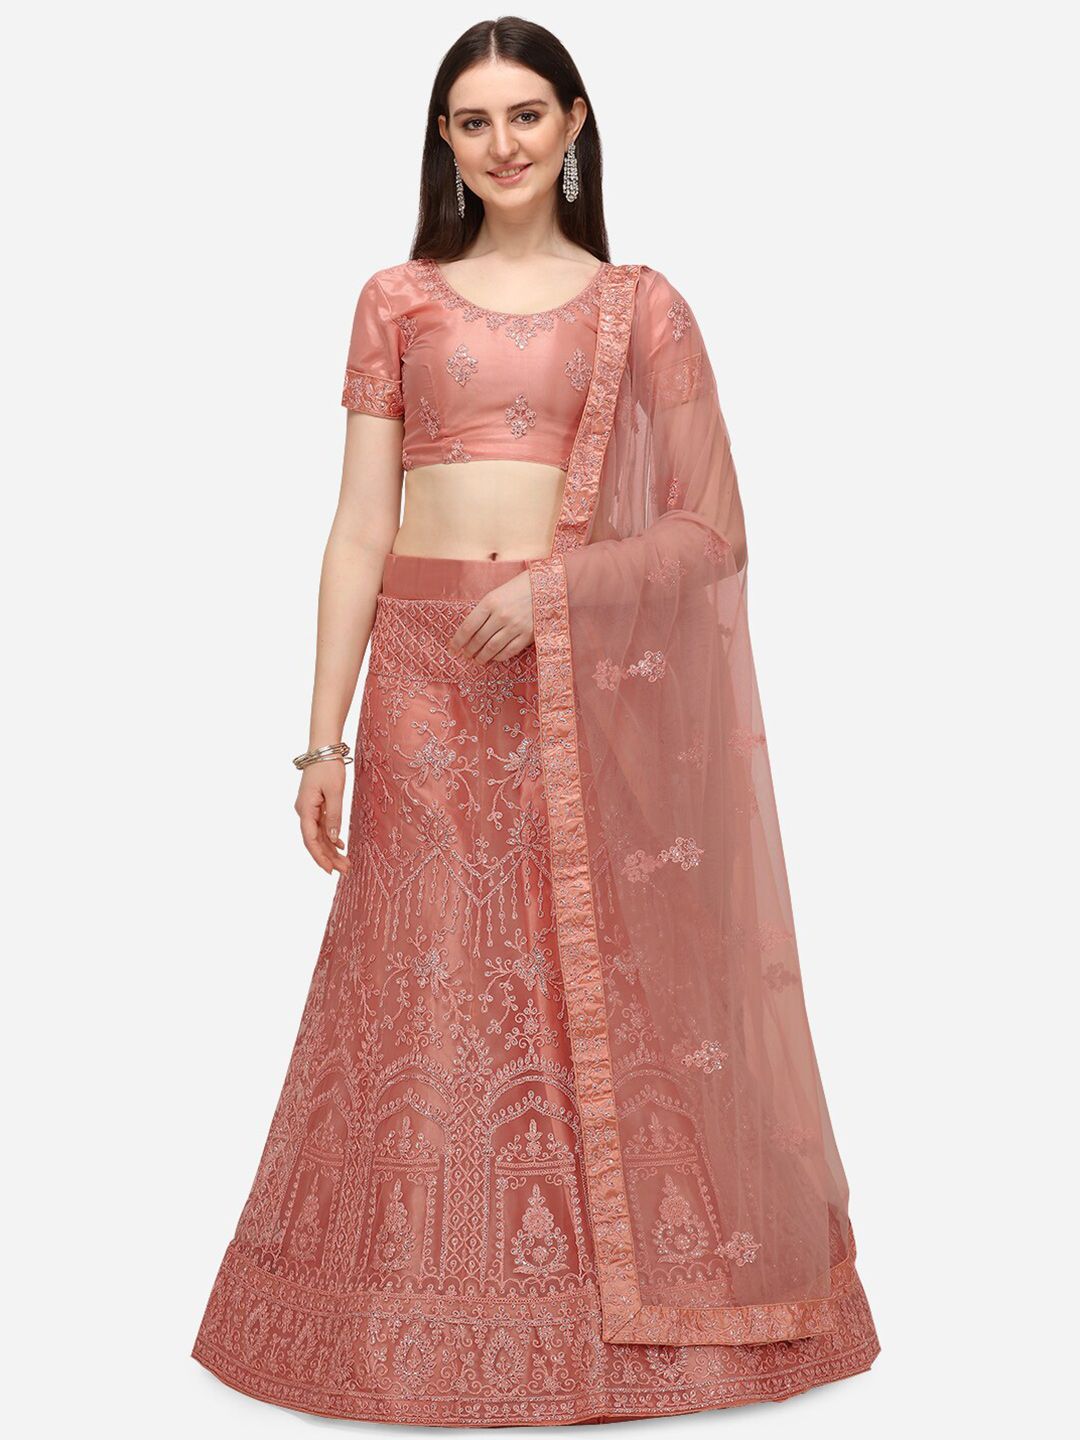 V SALES Peach Embroidered Sequinned Semi-Stitched Lehenga & Unstitched Blouse With Dupatta Price in India